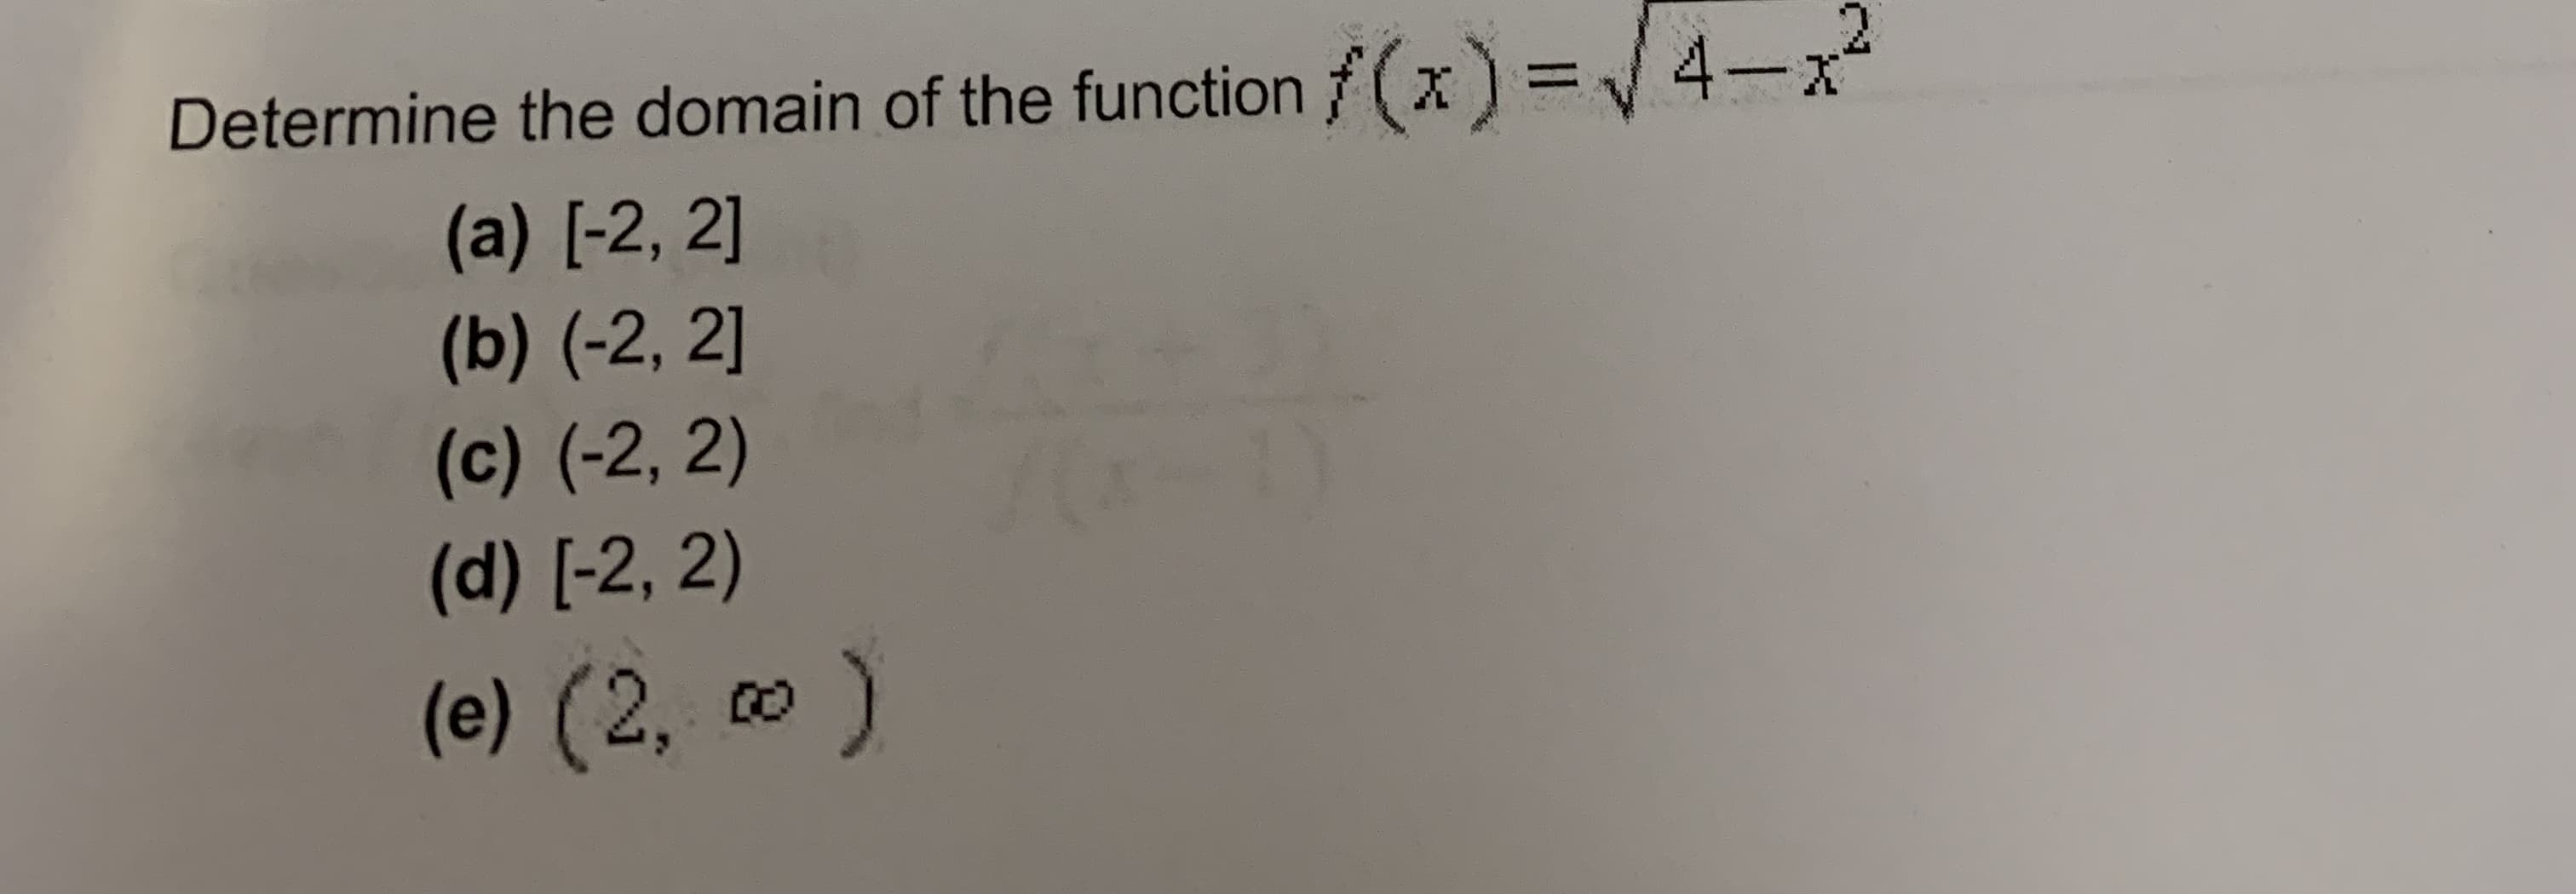 Determine the domain of the function (x) 4-x
(a) [-2, 2]
(b) (-2, 2]
(c) (-2, 2)
(d) [-2, 2)
(e) (2, o )
